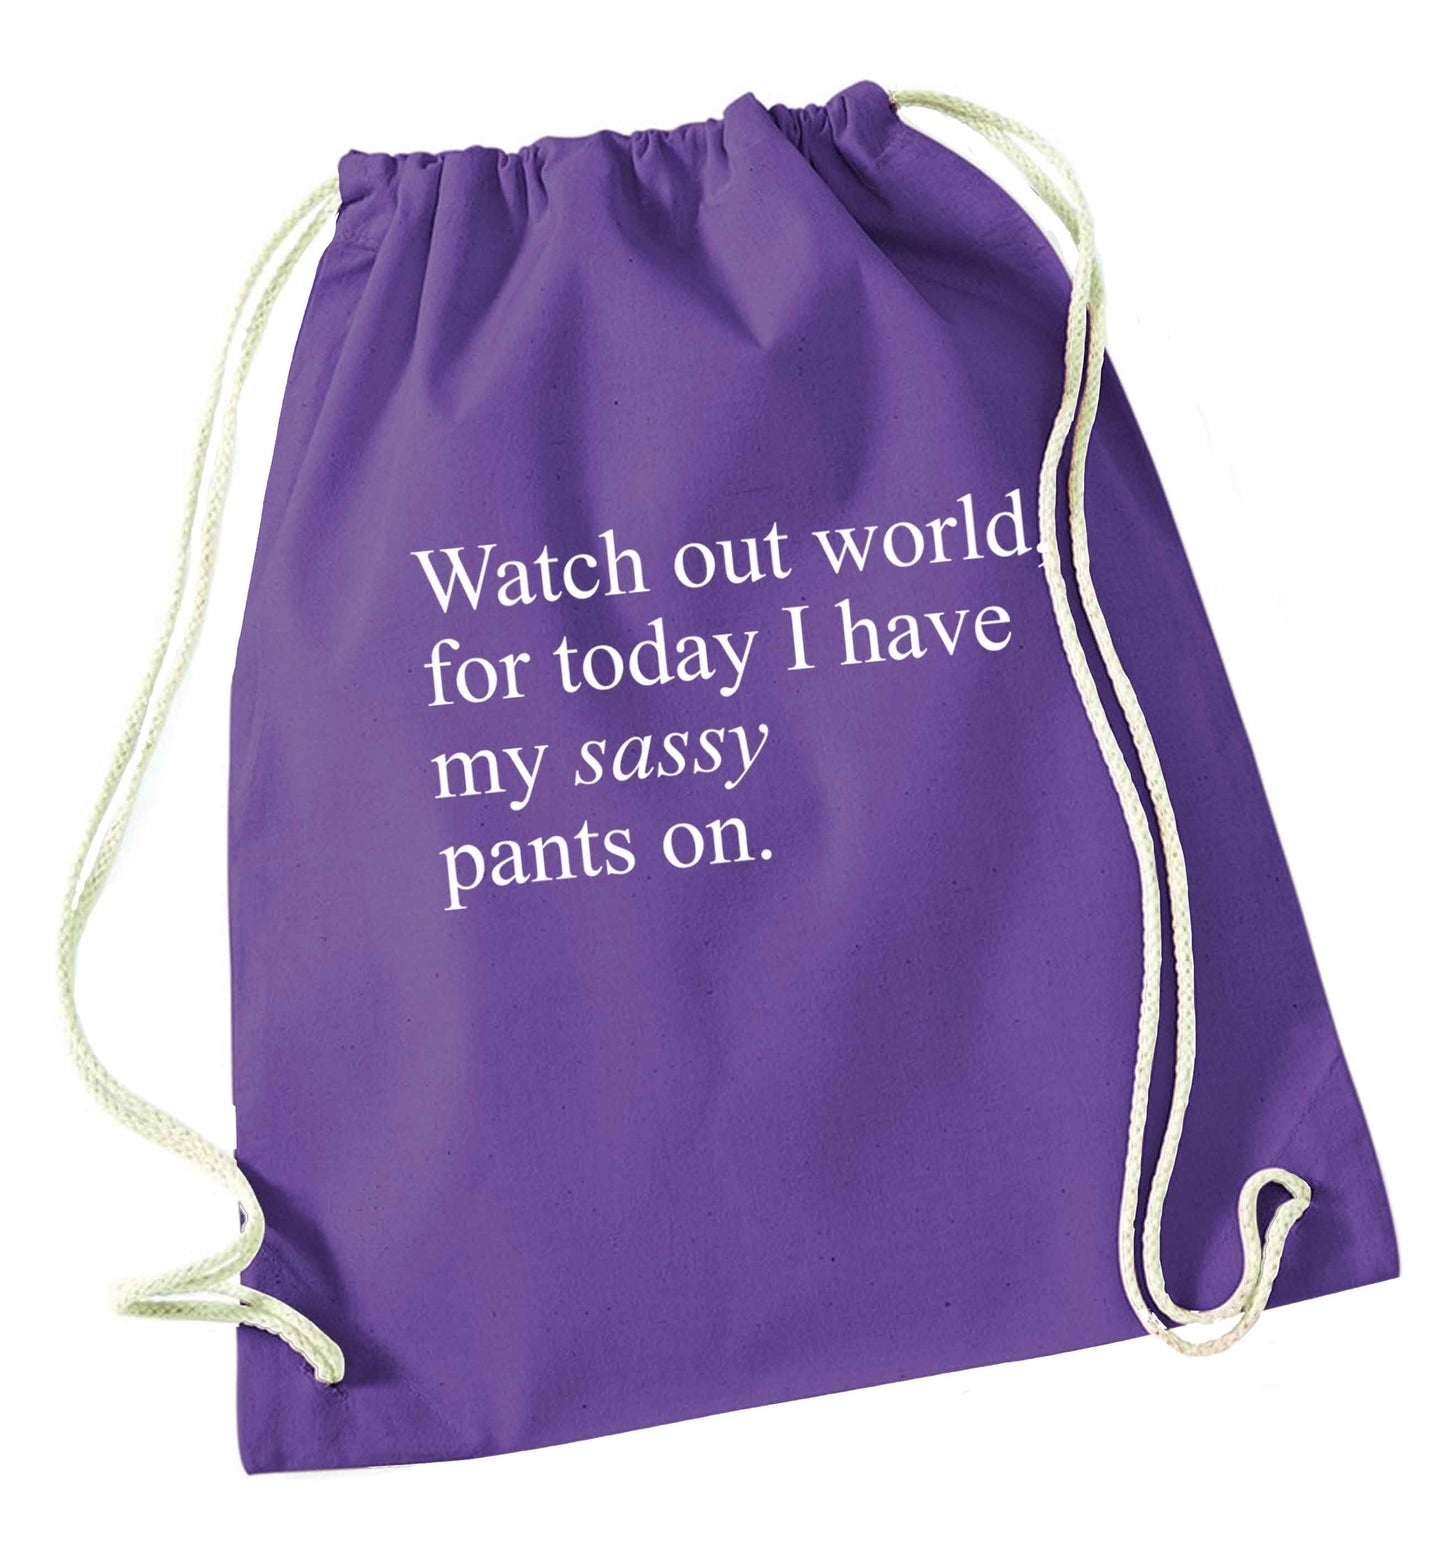 Watch out world for today I have my sassy pants on purple drawstring bag